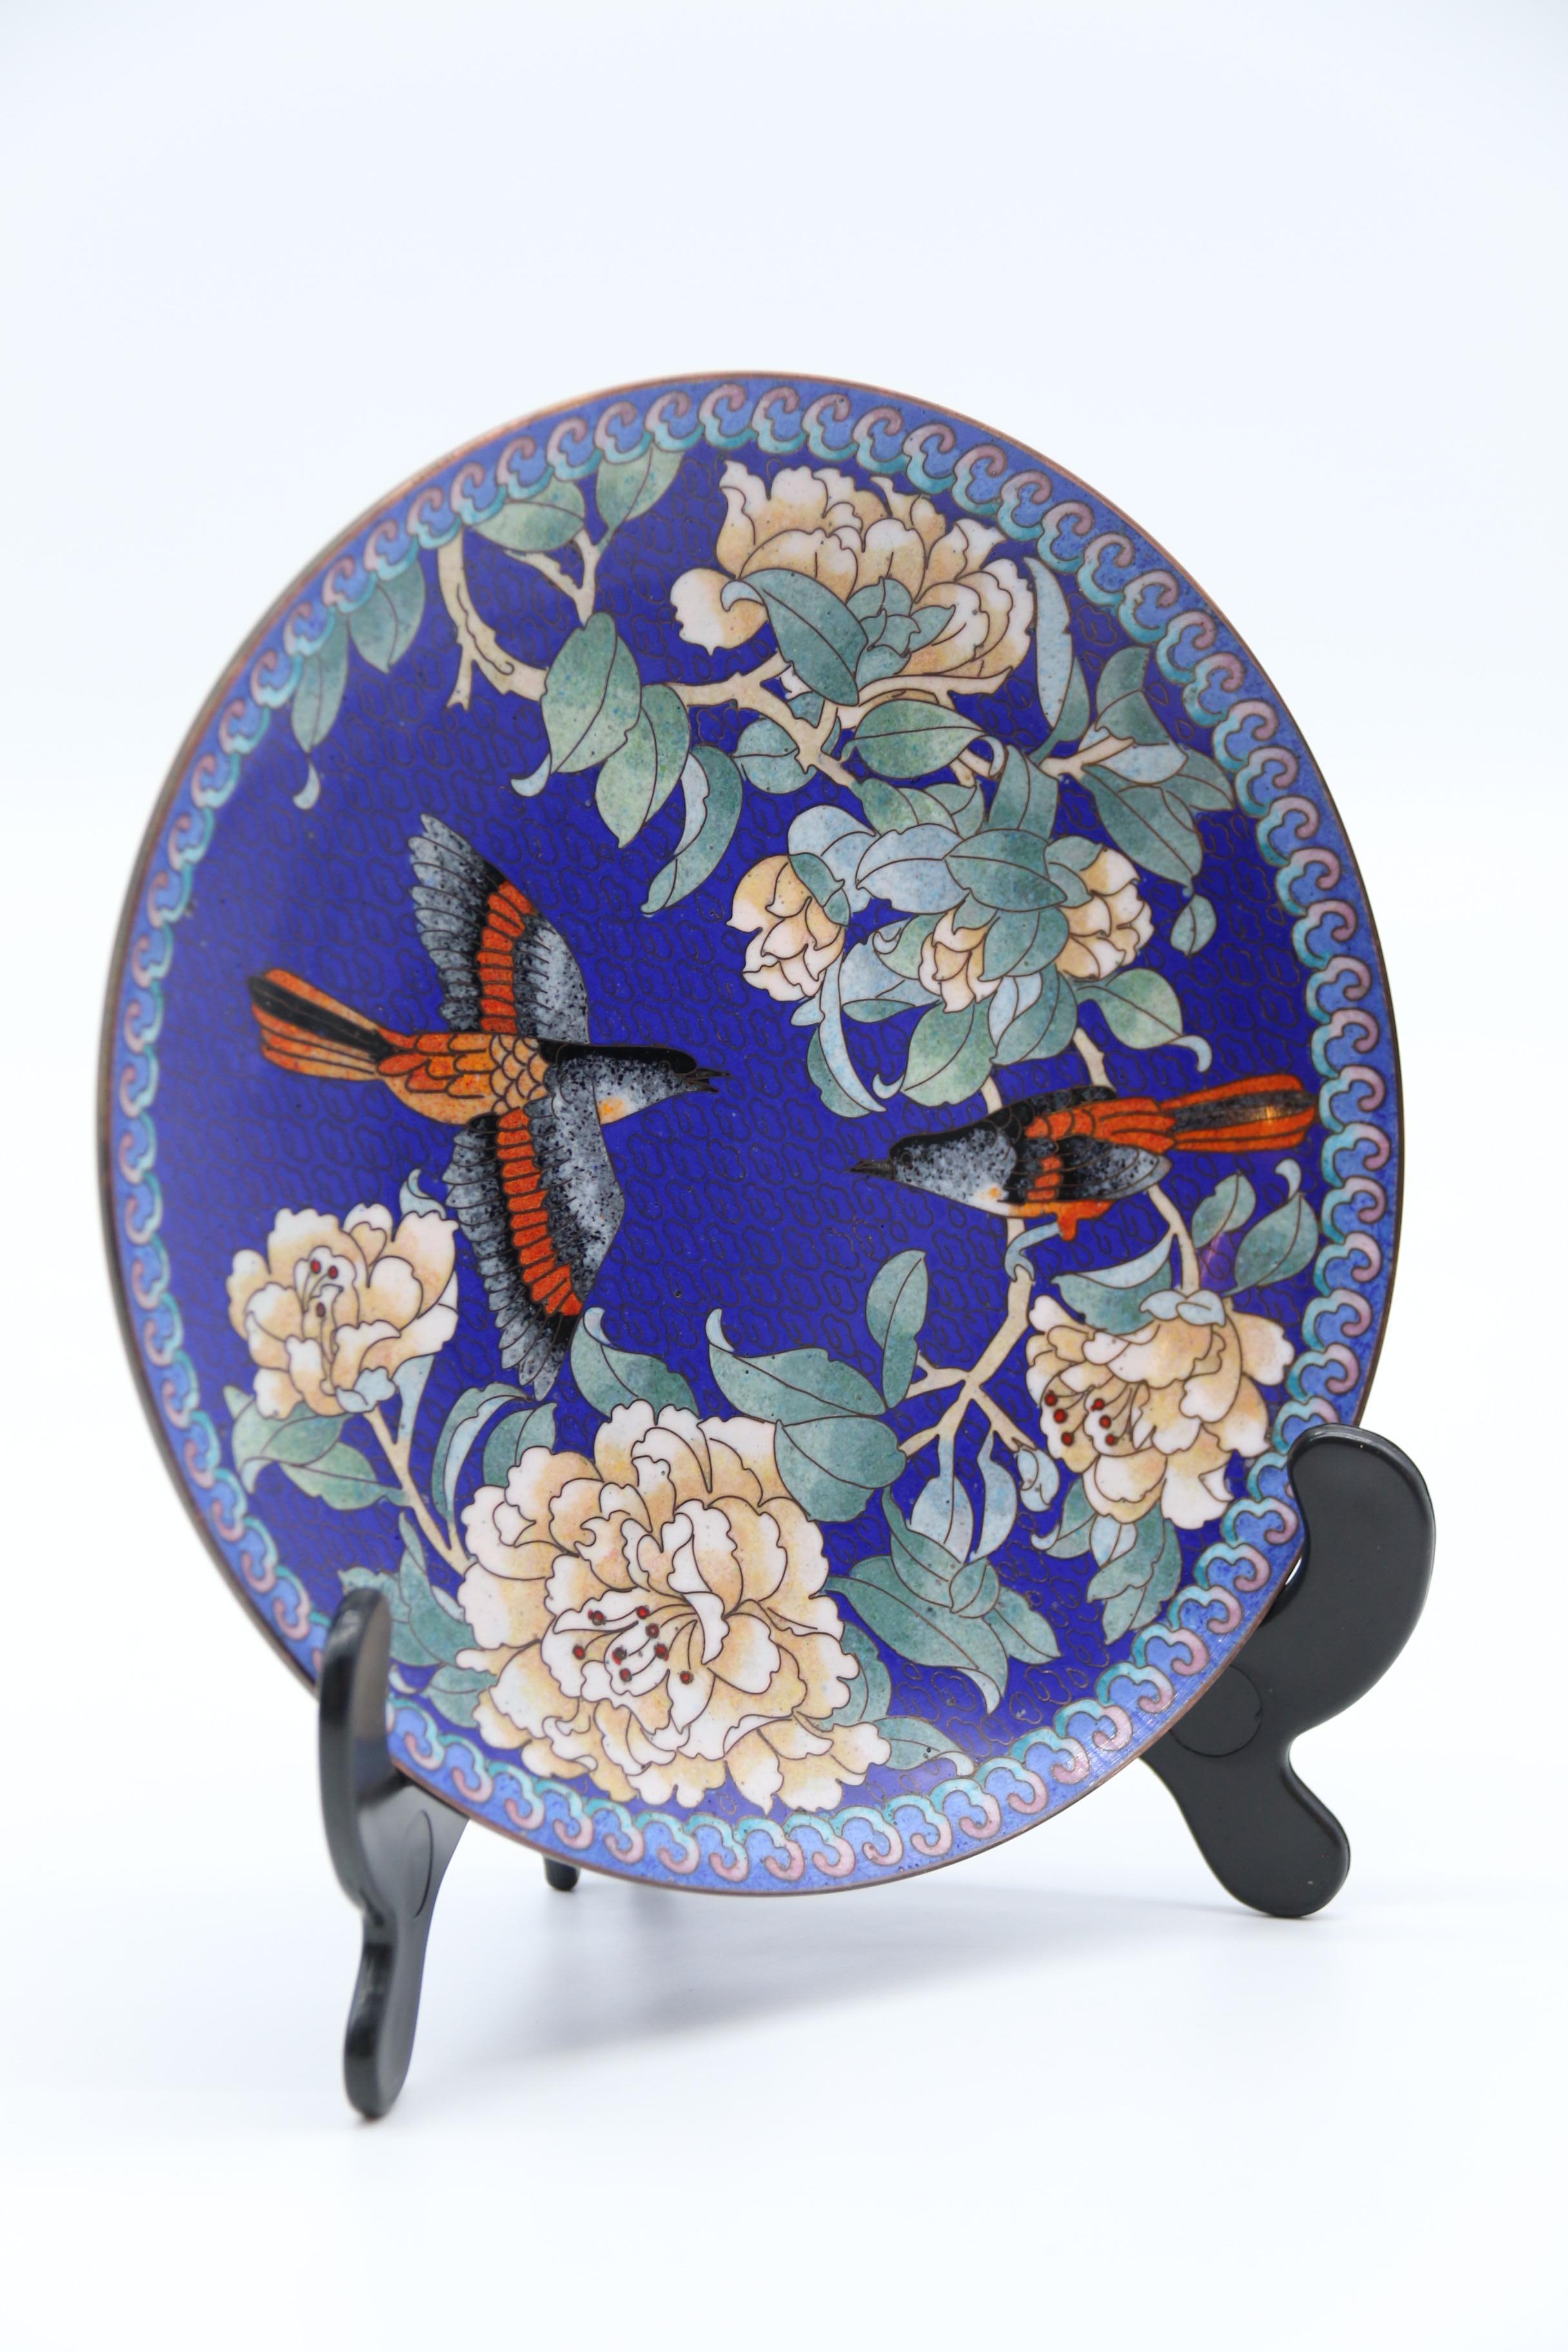 This beautiful and vibrant set of four Chinese cloisonne wall or cabinet plates is most eyecatching.  The design of exotic birds amongst branches with a flowering blossom is very well done with fine wires forming the design over a brass base which